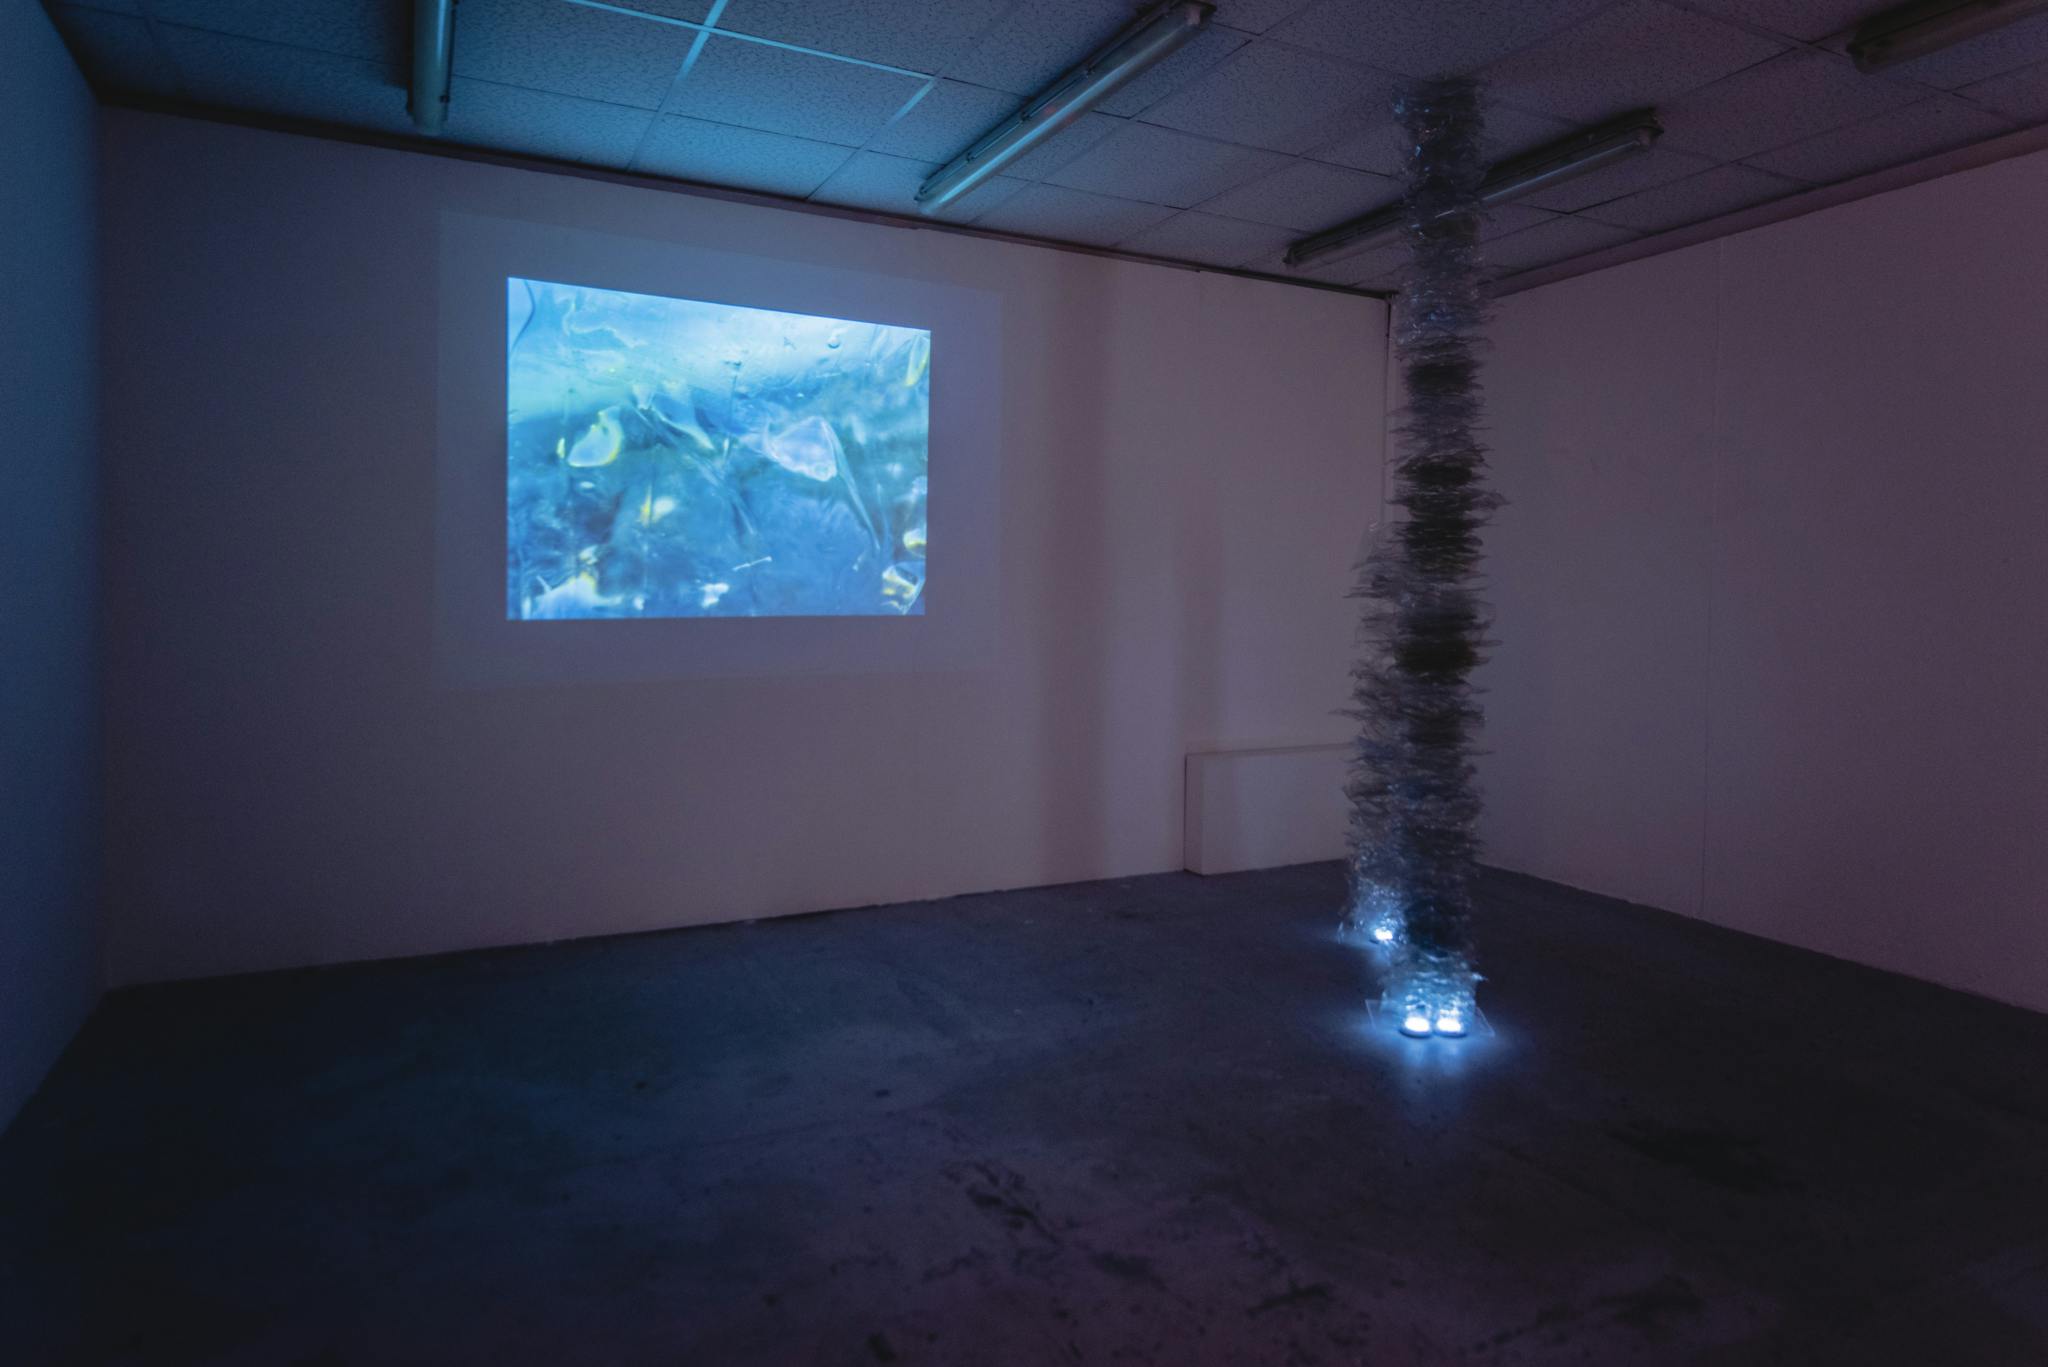 Image shows an art installation featuring a pole covered in shredded plastic being lit up from the bottom with a projected film in the background on the wall